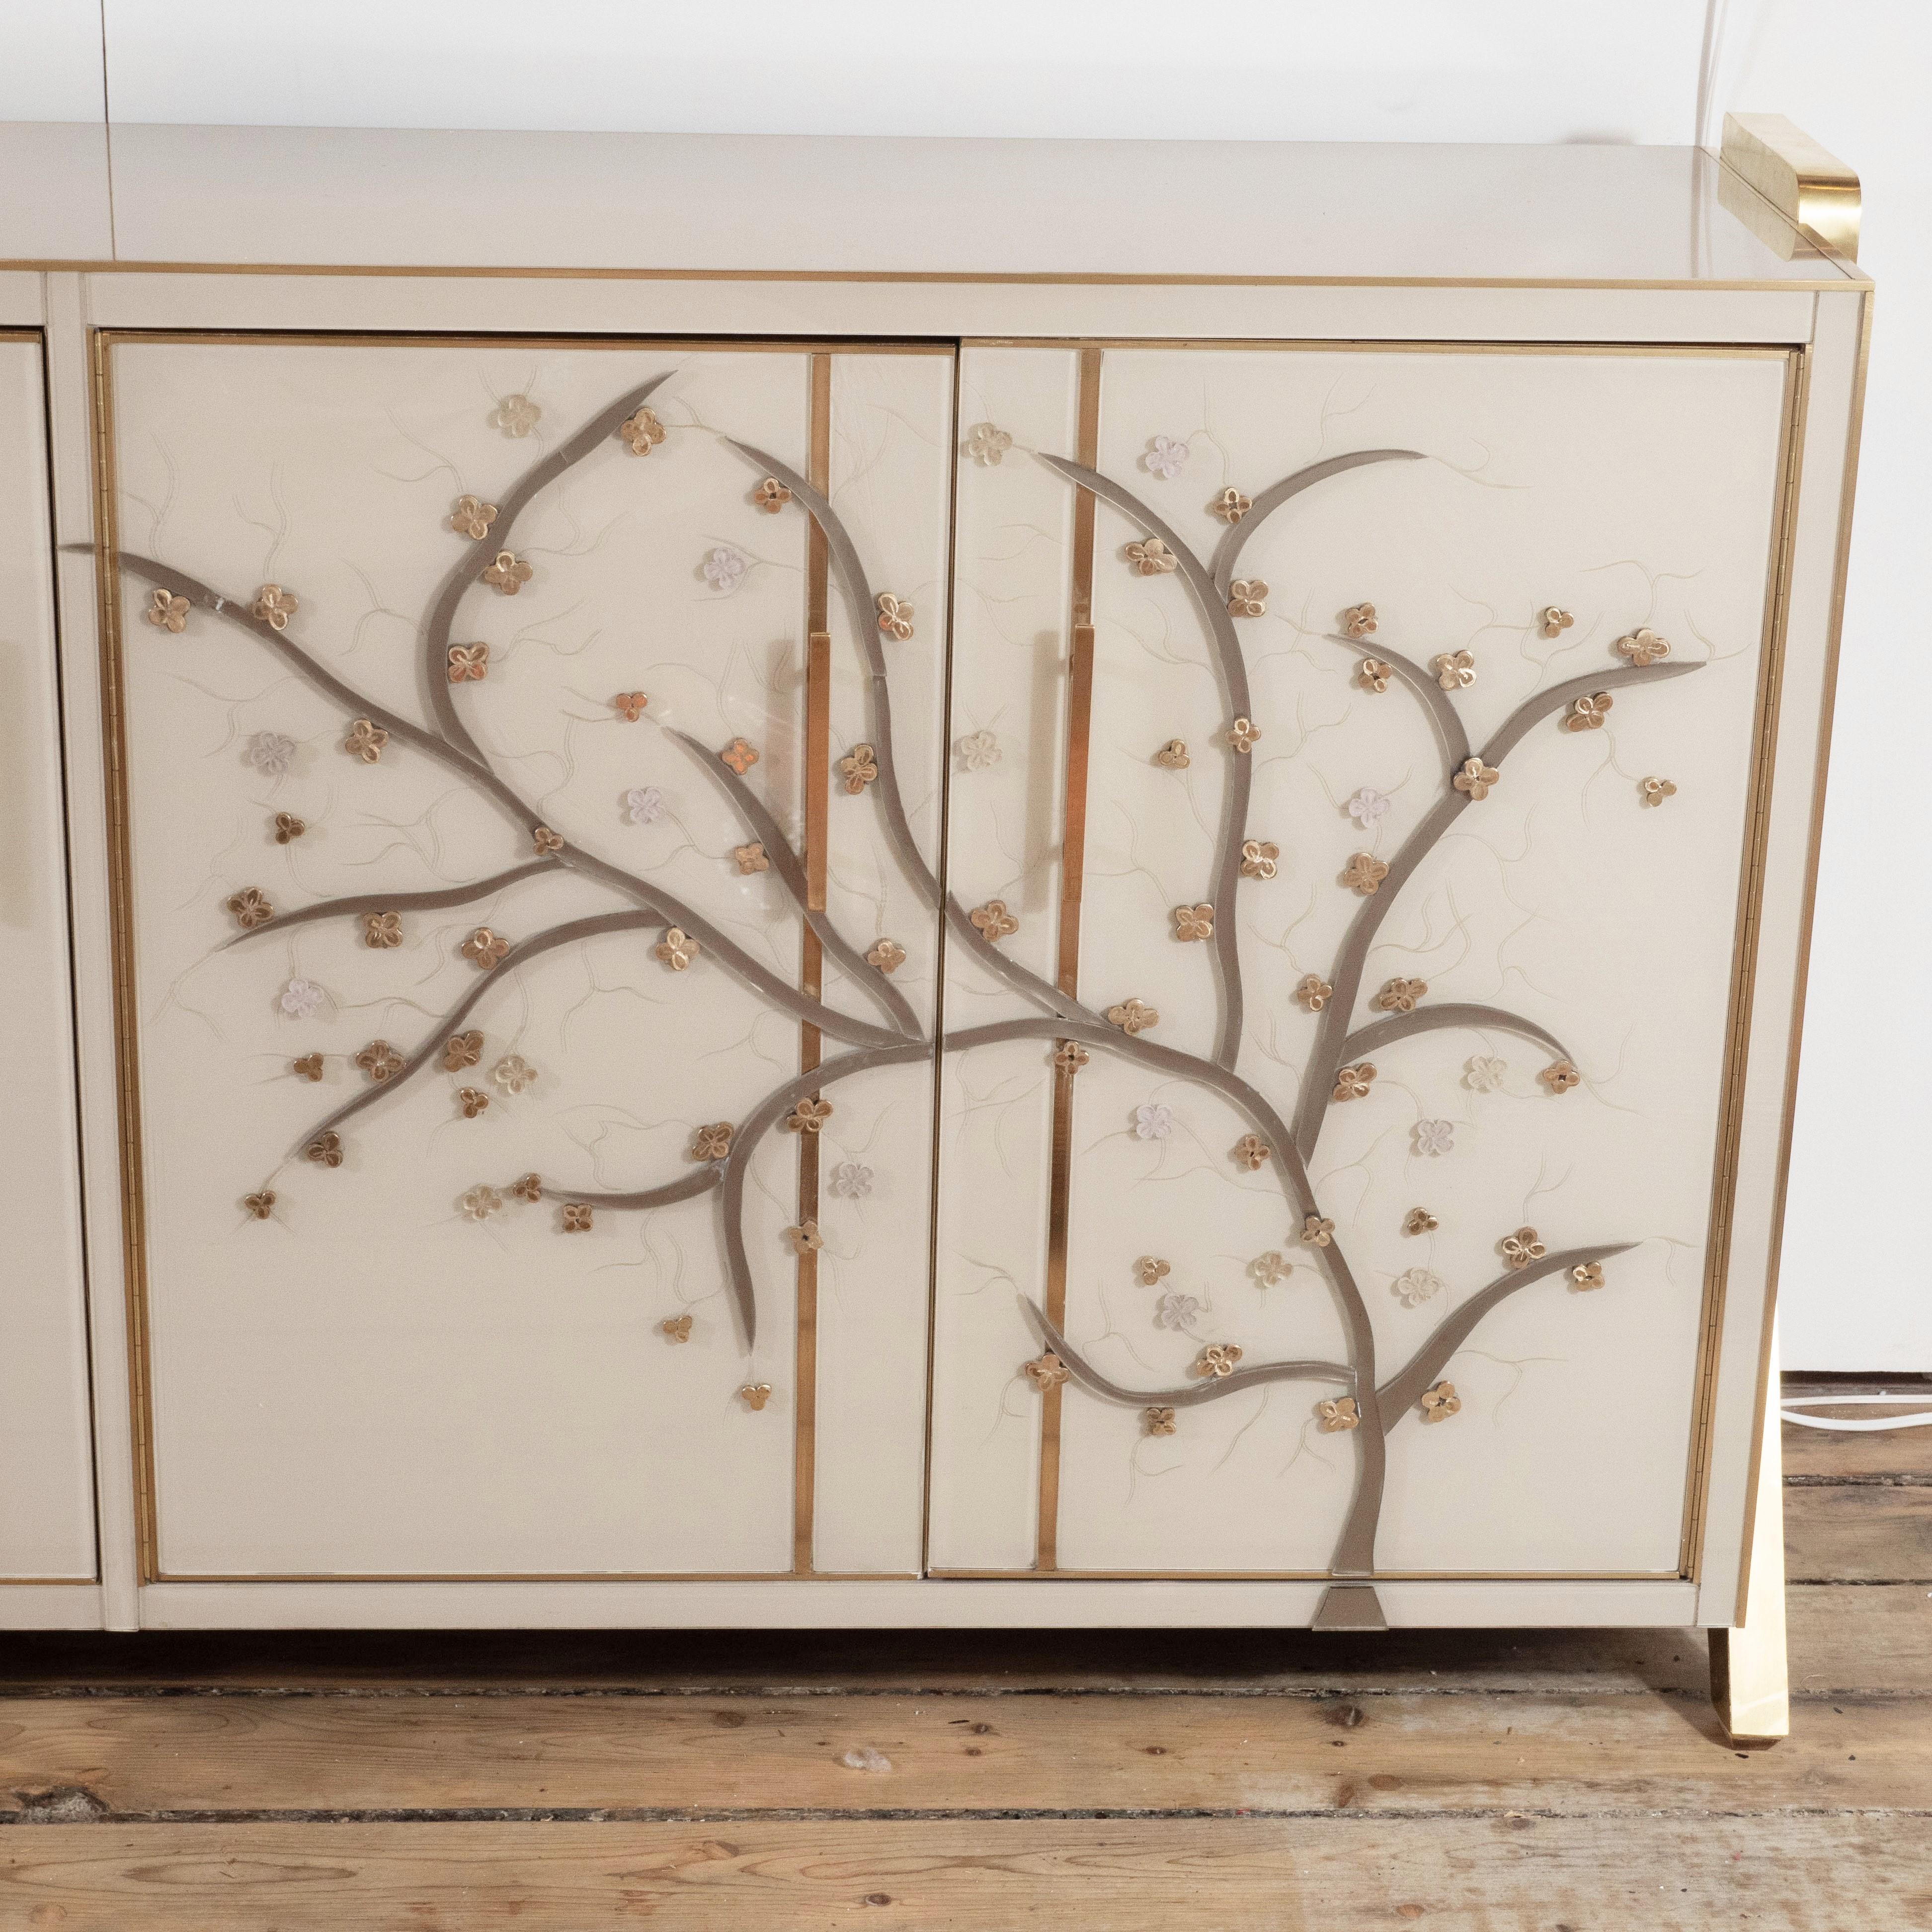 One of a kind pair of sideboards handmade in Venice, Italy by a master artisan and artist. Wooden frame is covered in Ivory hand painted Murano glass panels with brass inlays. Handmade and handcut multicolored glass flowers in pearl, lavender and